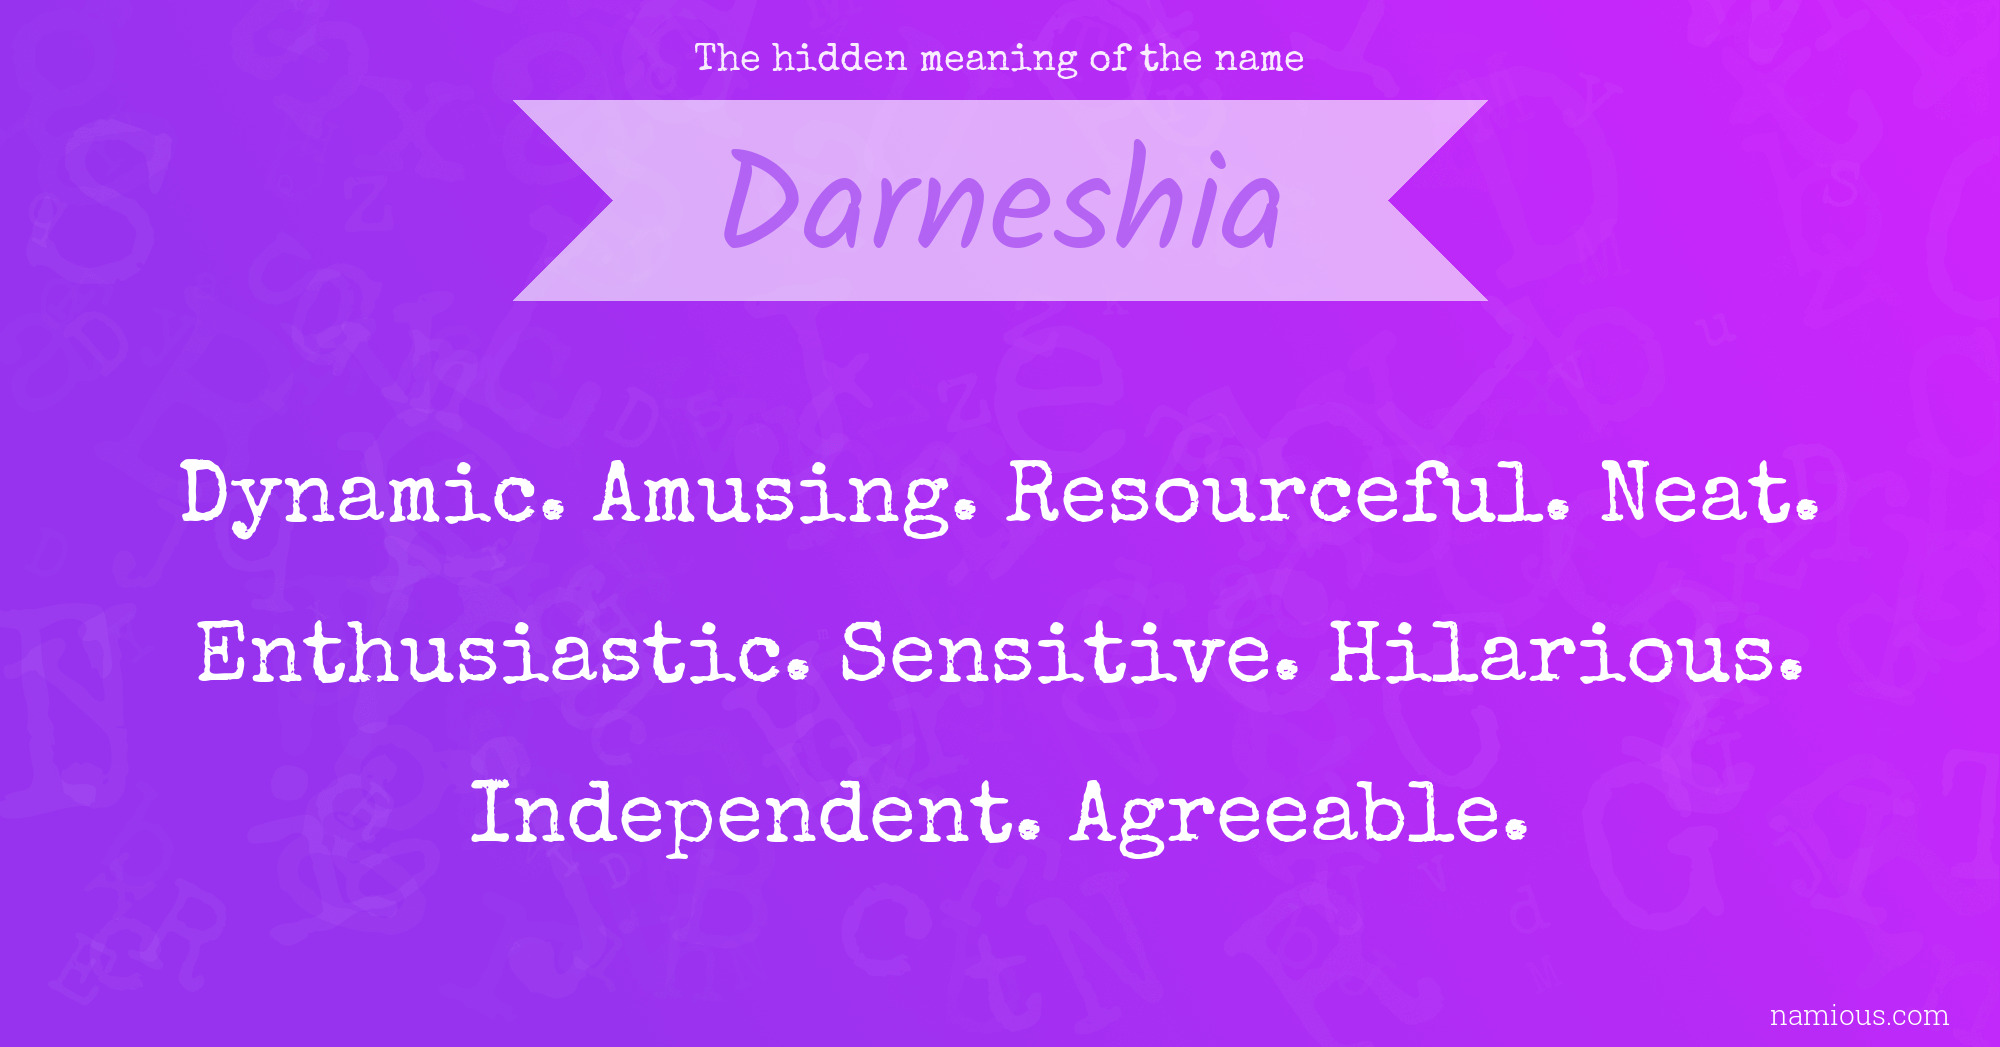 The hidden meaning of the name Darneshia